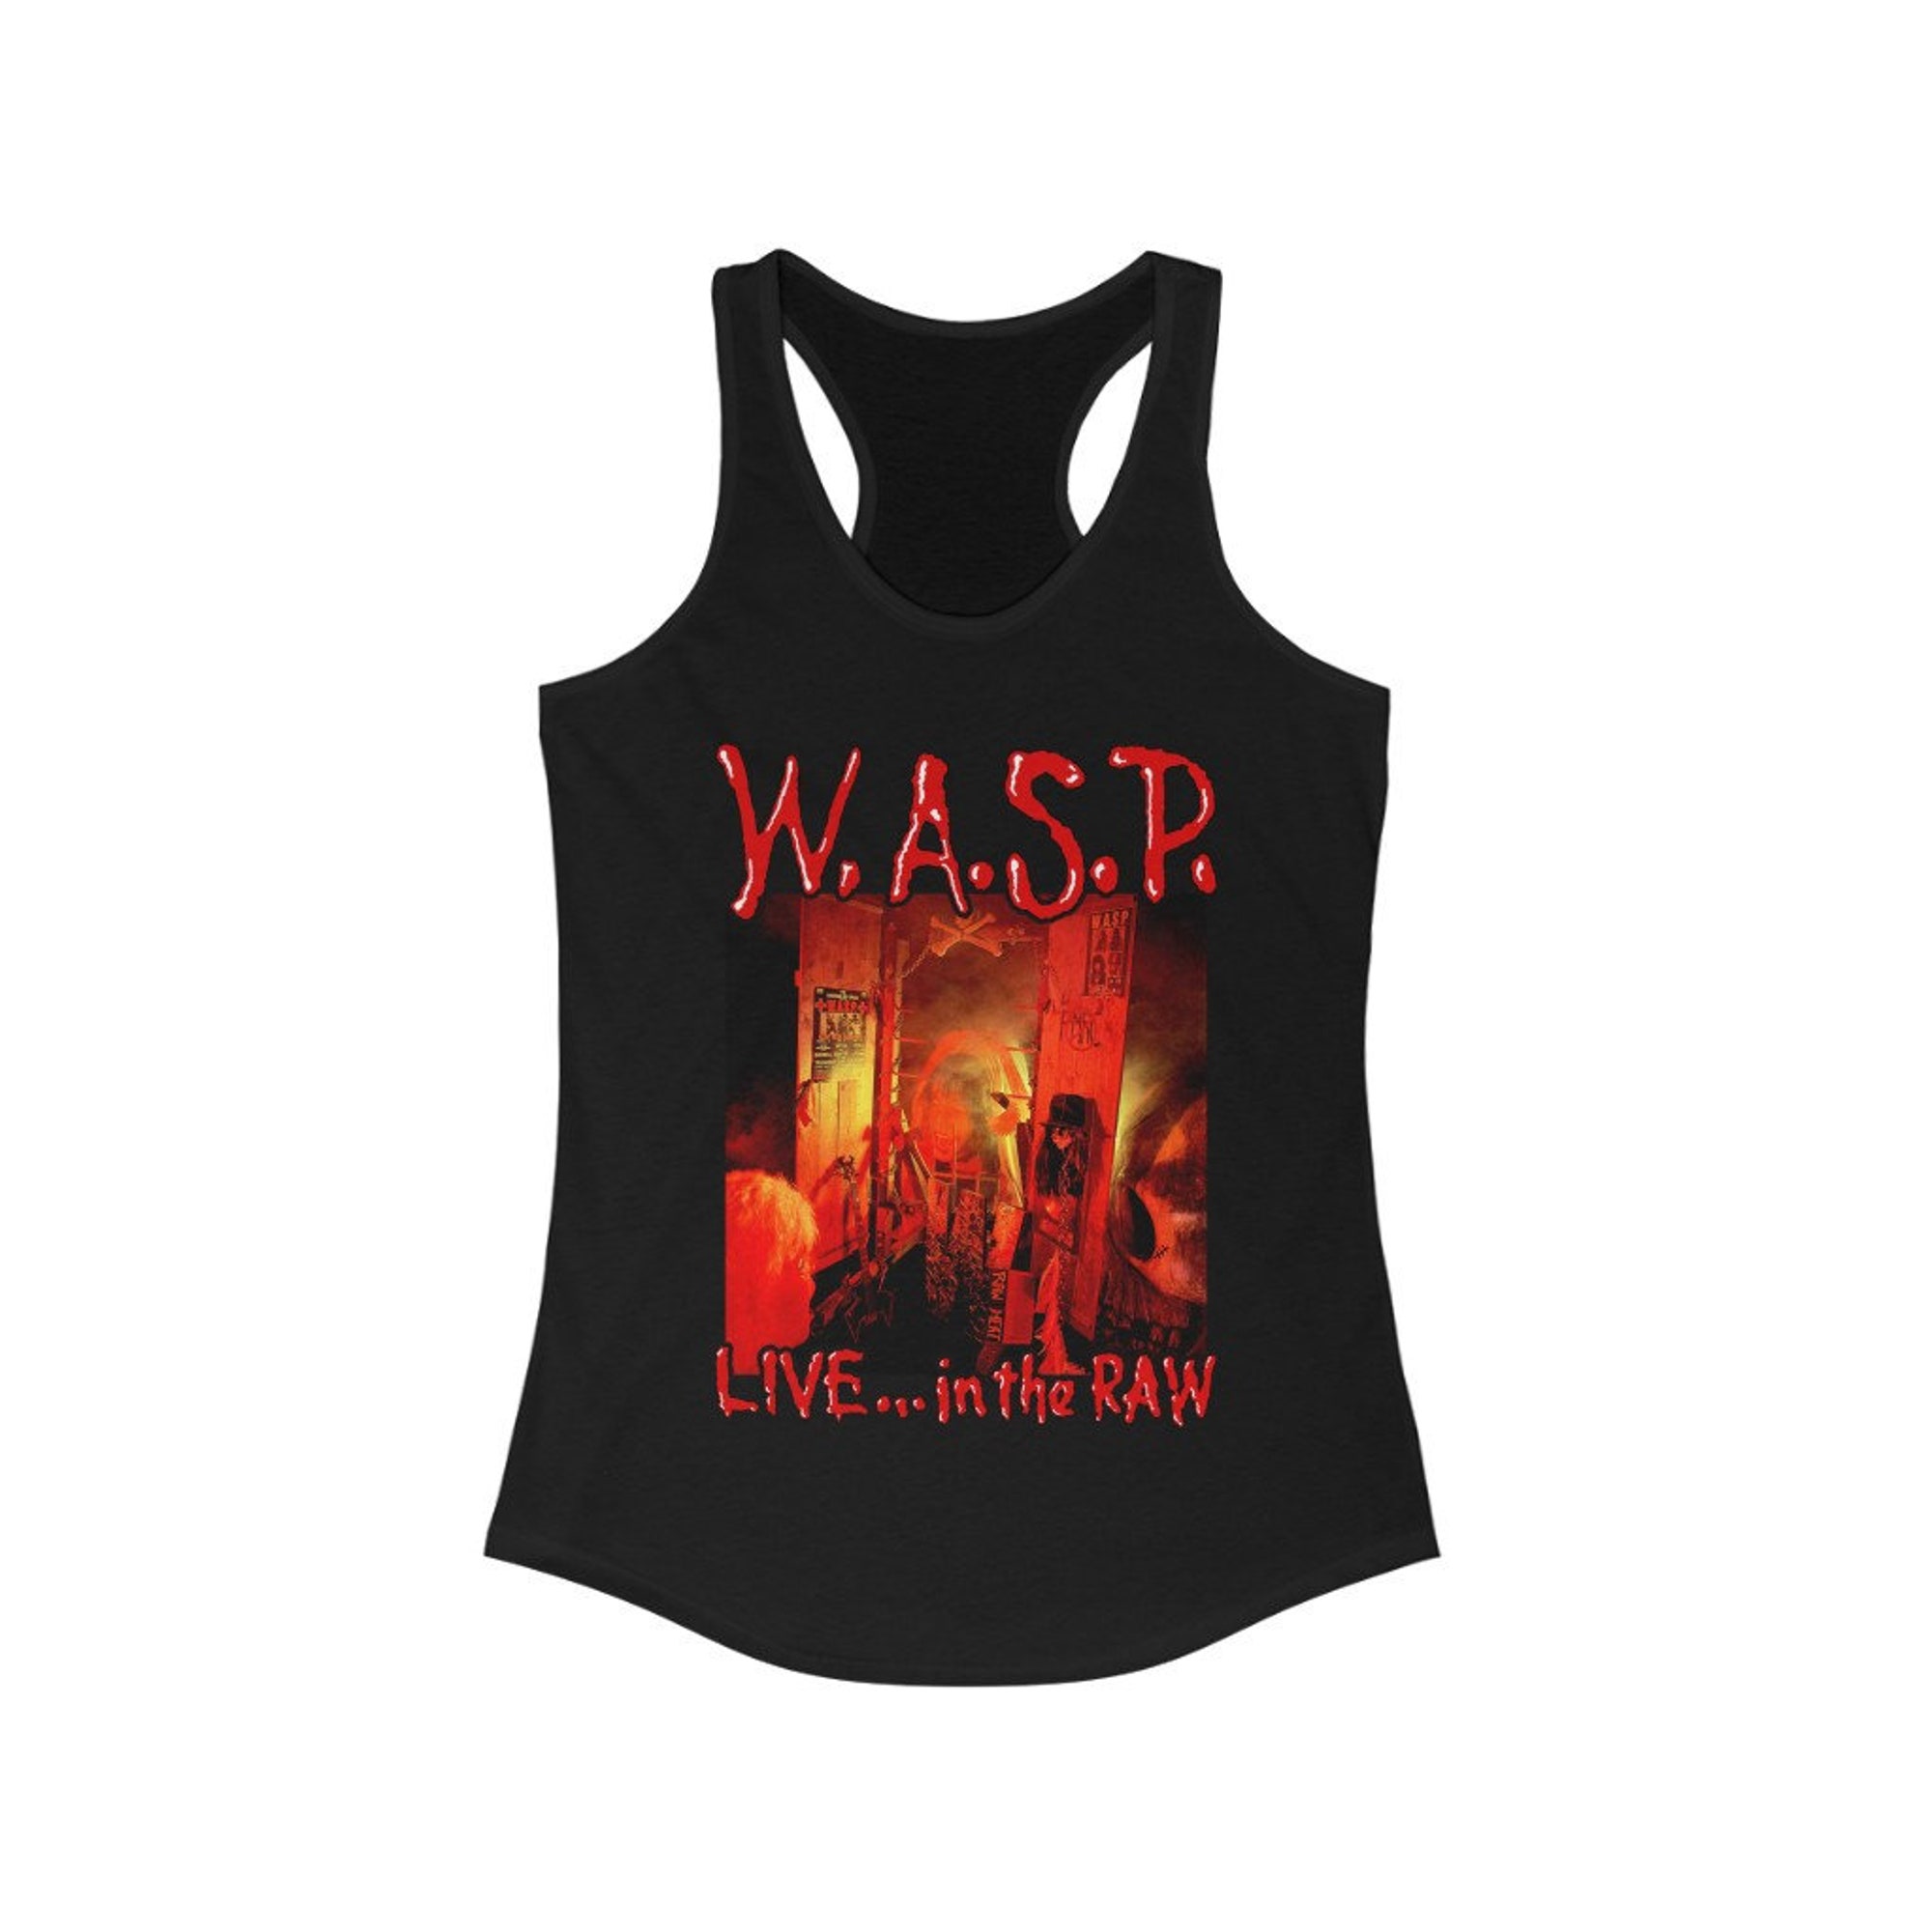 W.A.S.P Womens Tank Top, Live... In the Raw, Ladies WASP Band Sleeveless Tee